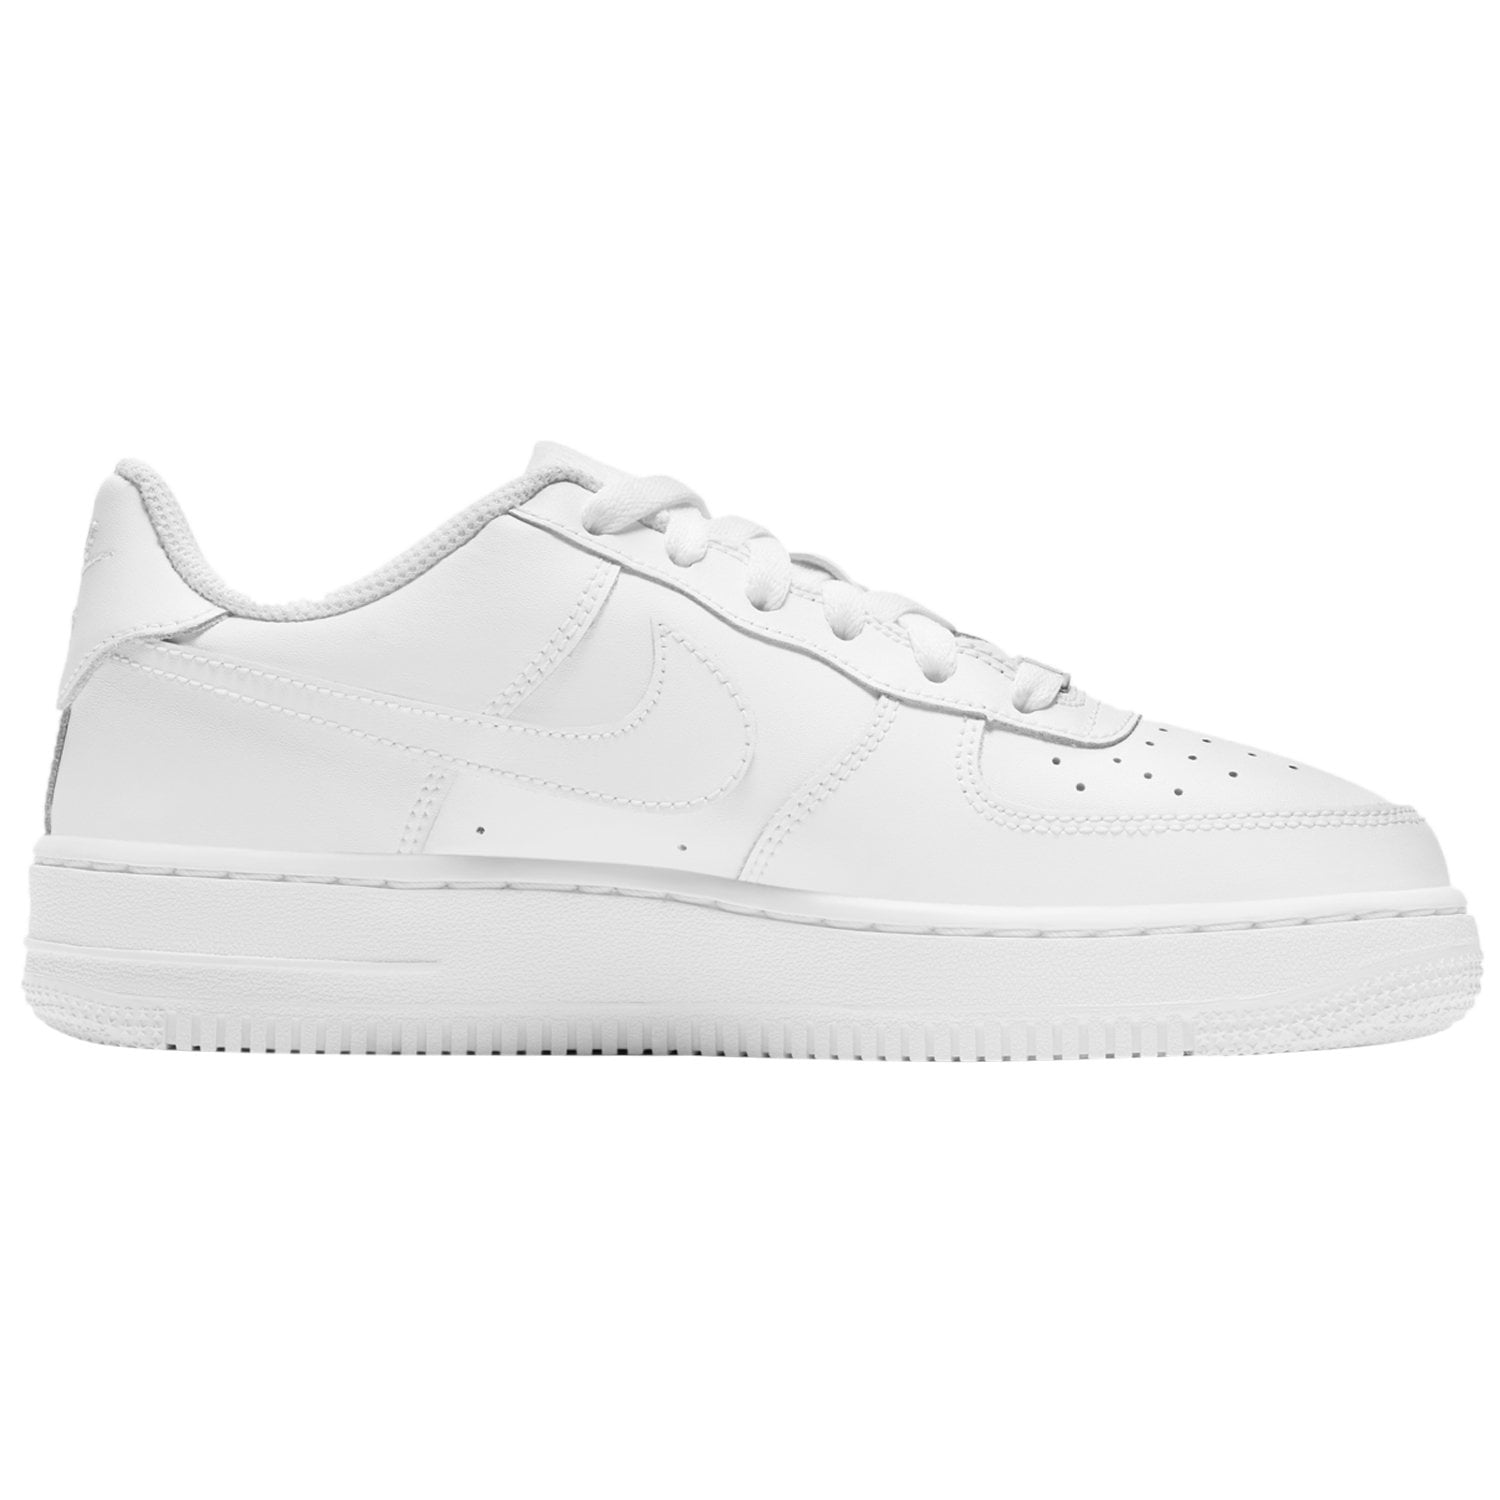 walmart air force 1 dupes painted